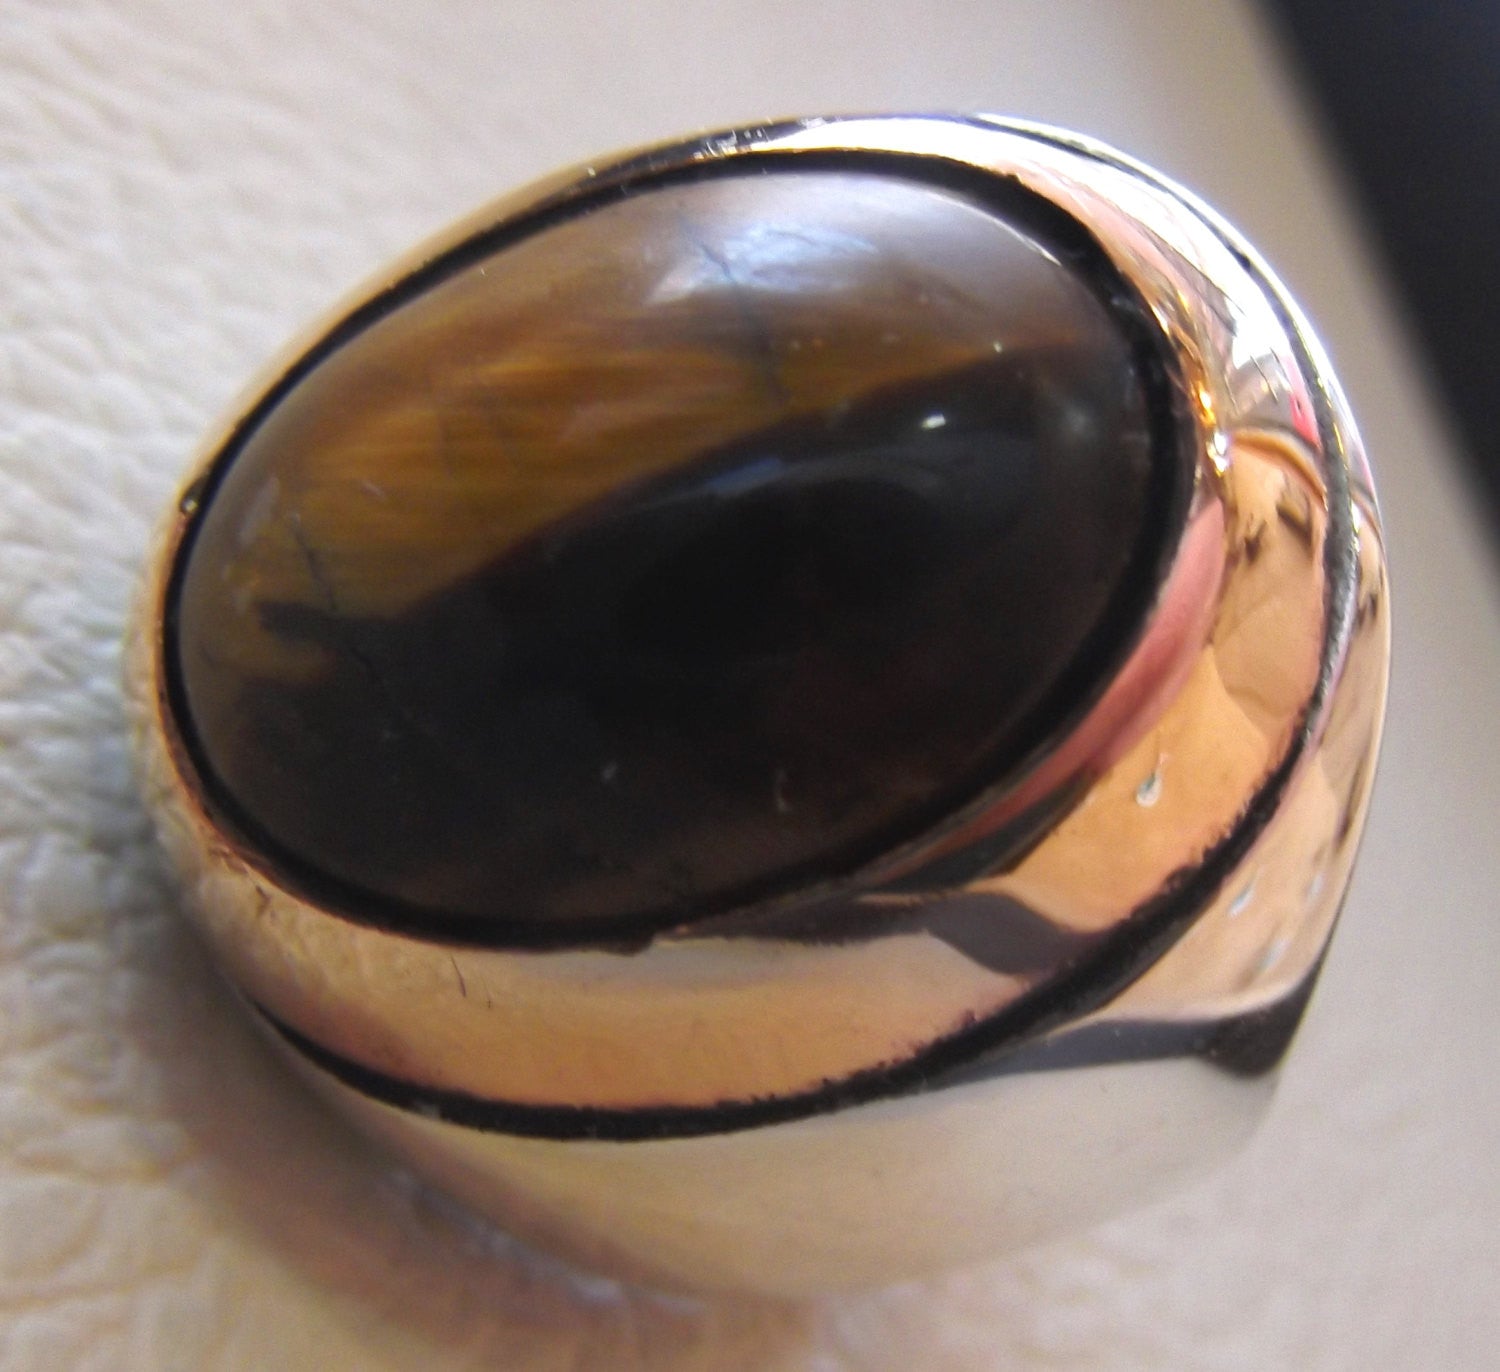 tiger eye big oval cabochon two tone men ring sterling silver 925 bronze frame cat eye semi precious natural stone all sizes jewelry